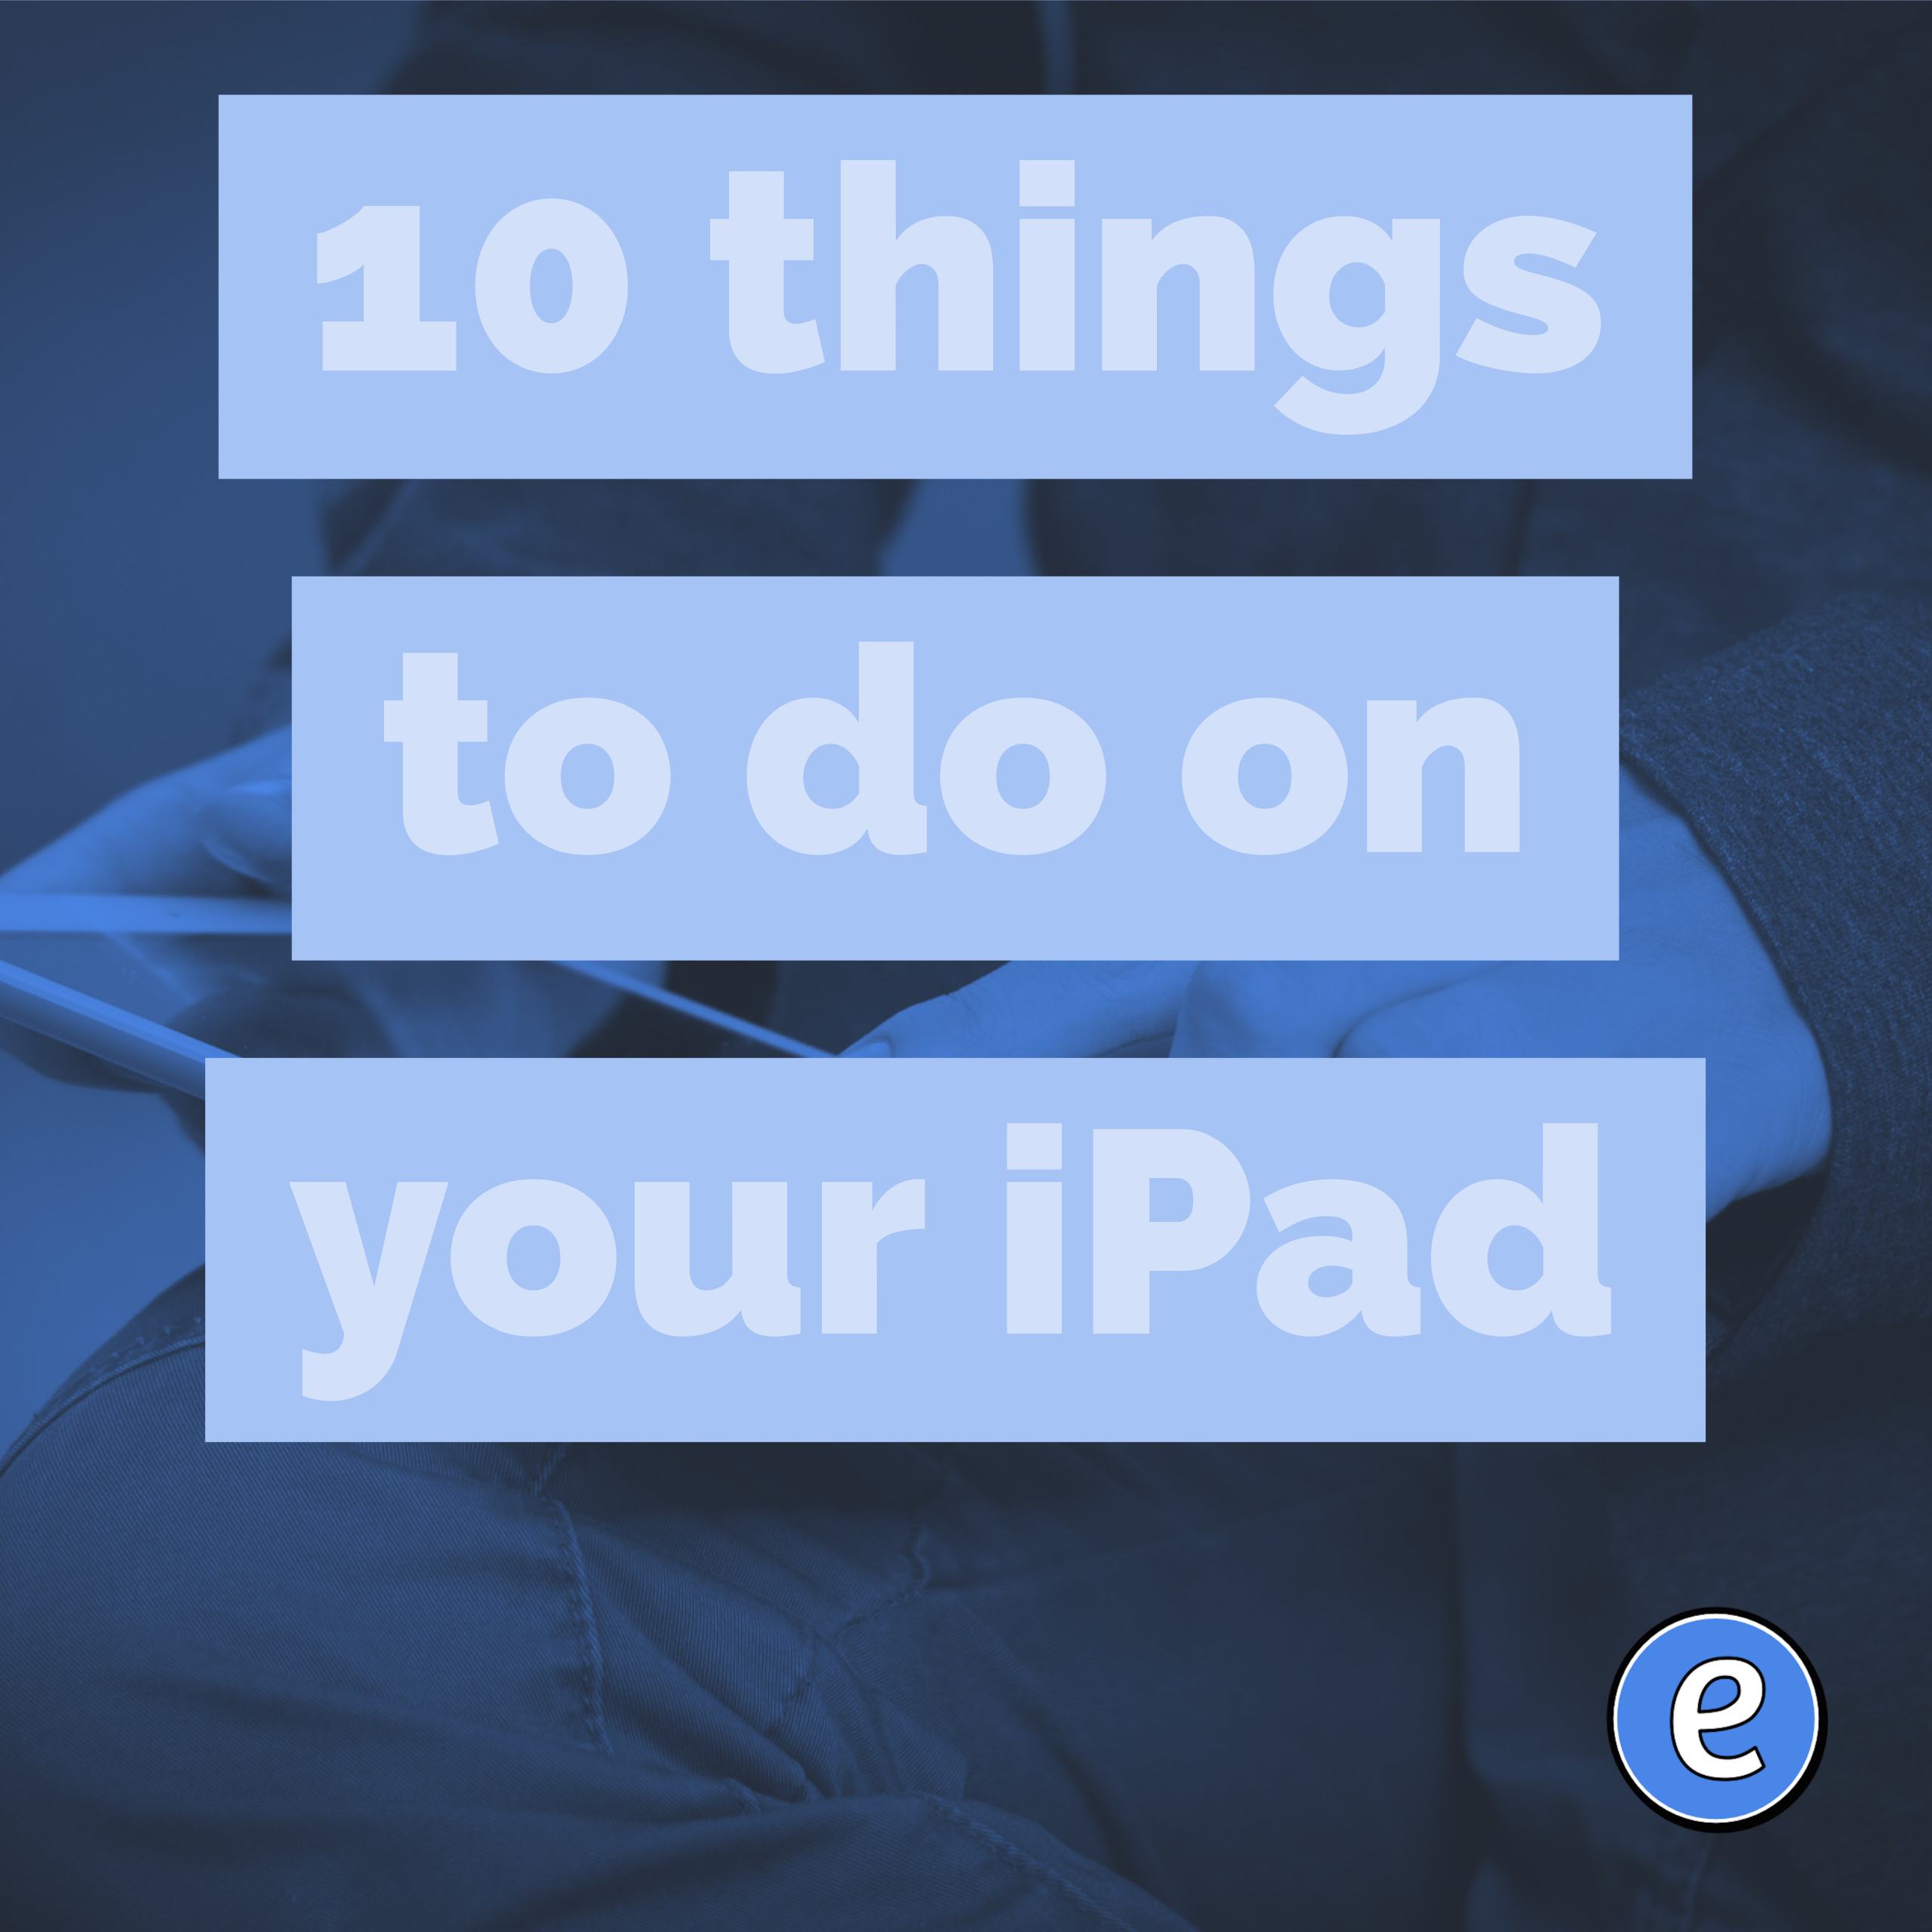 10 things to do on your iPad